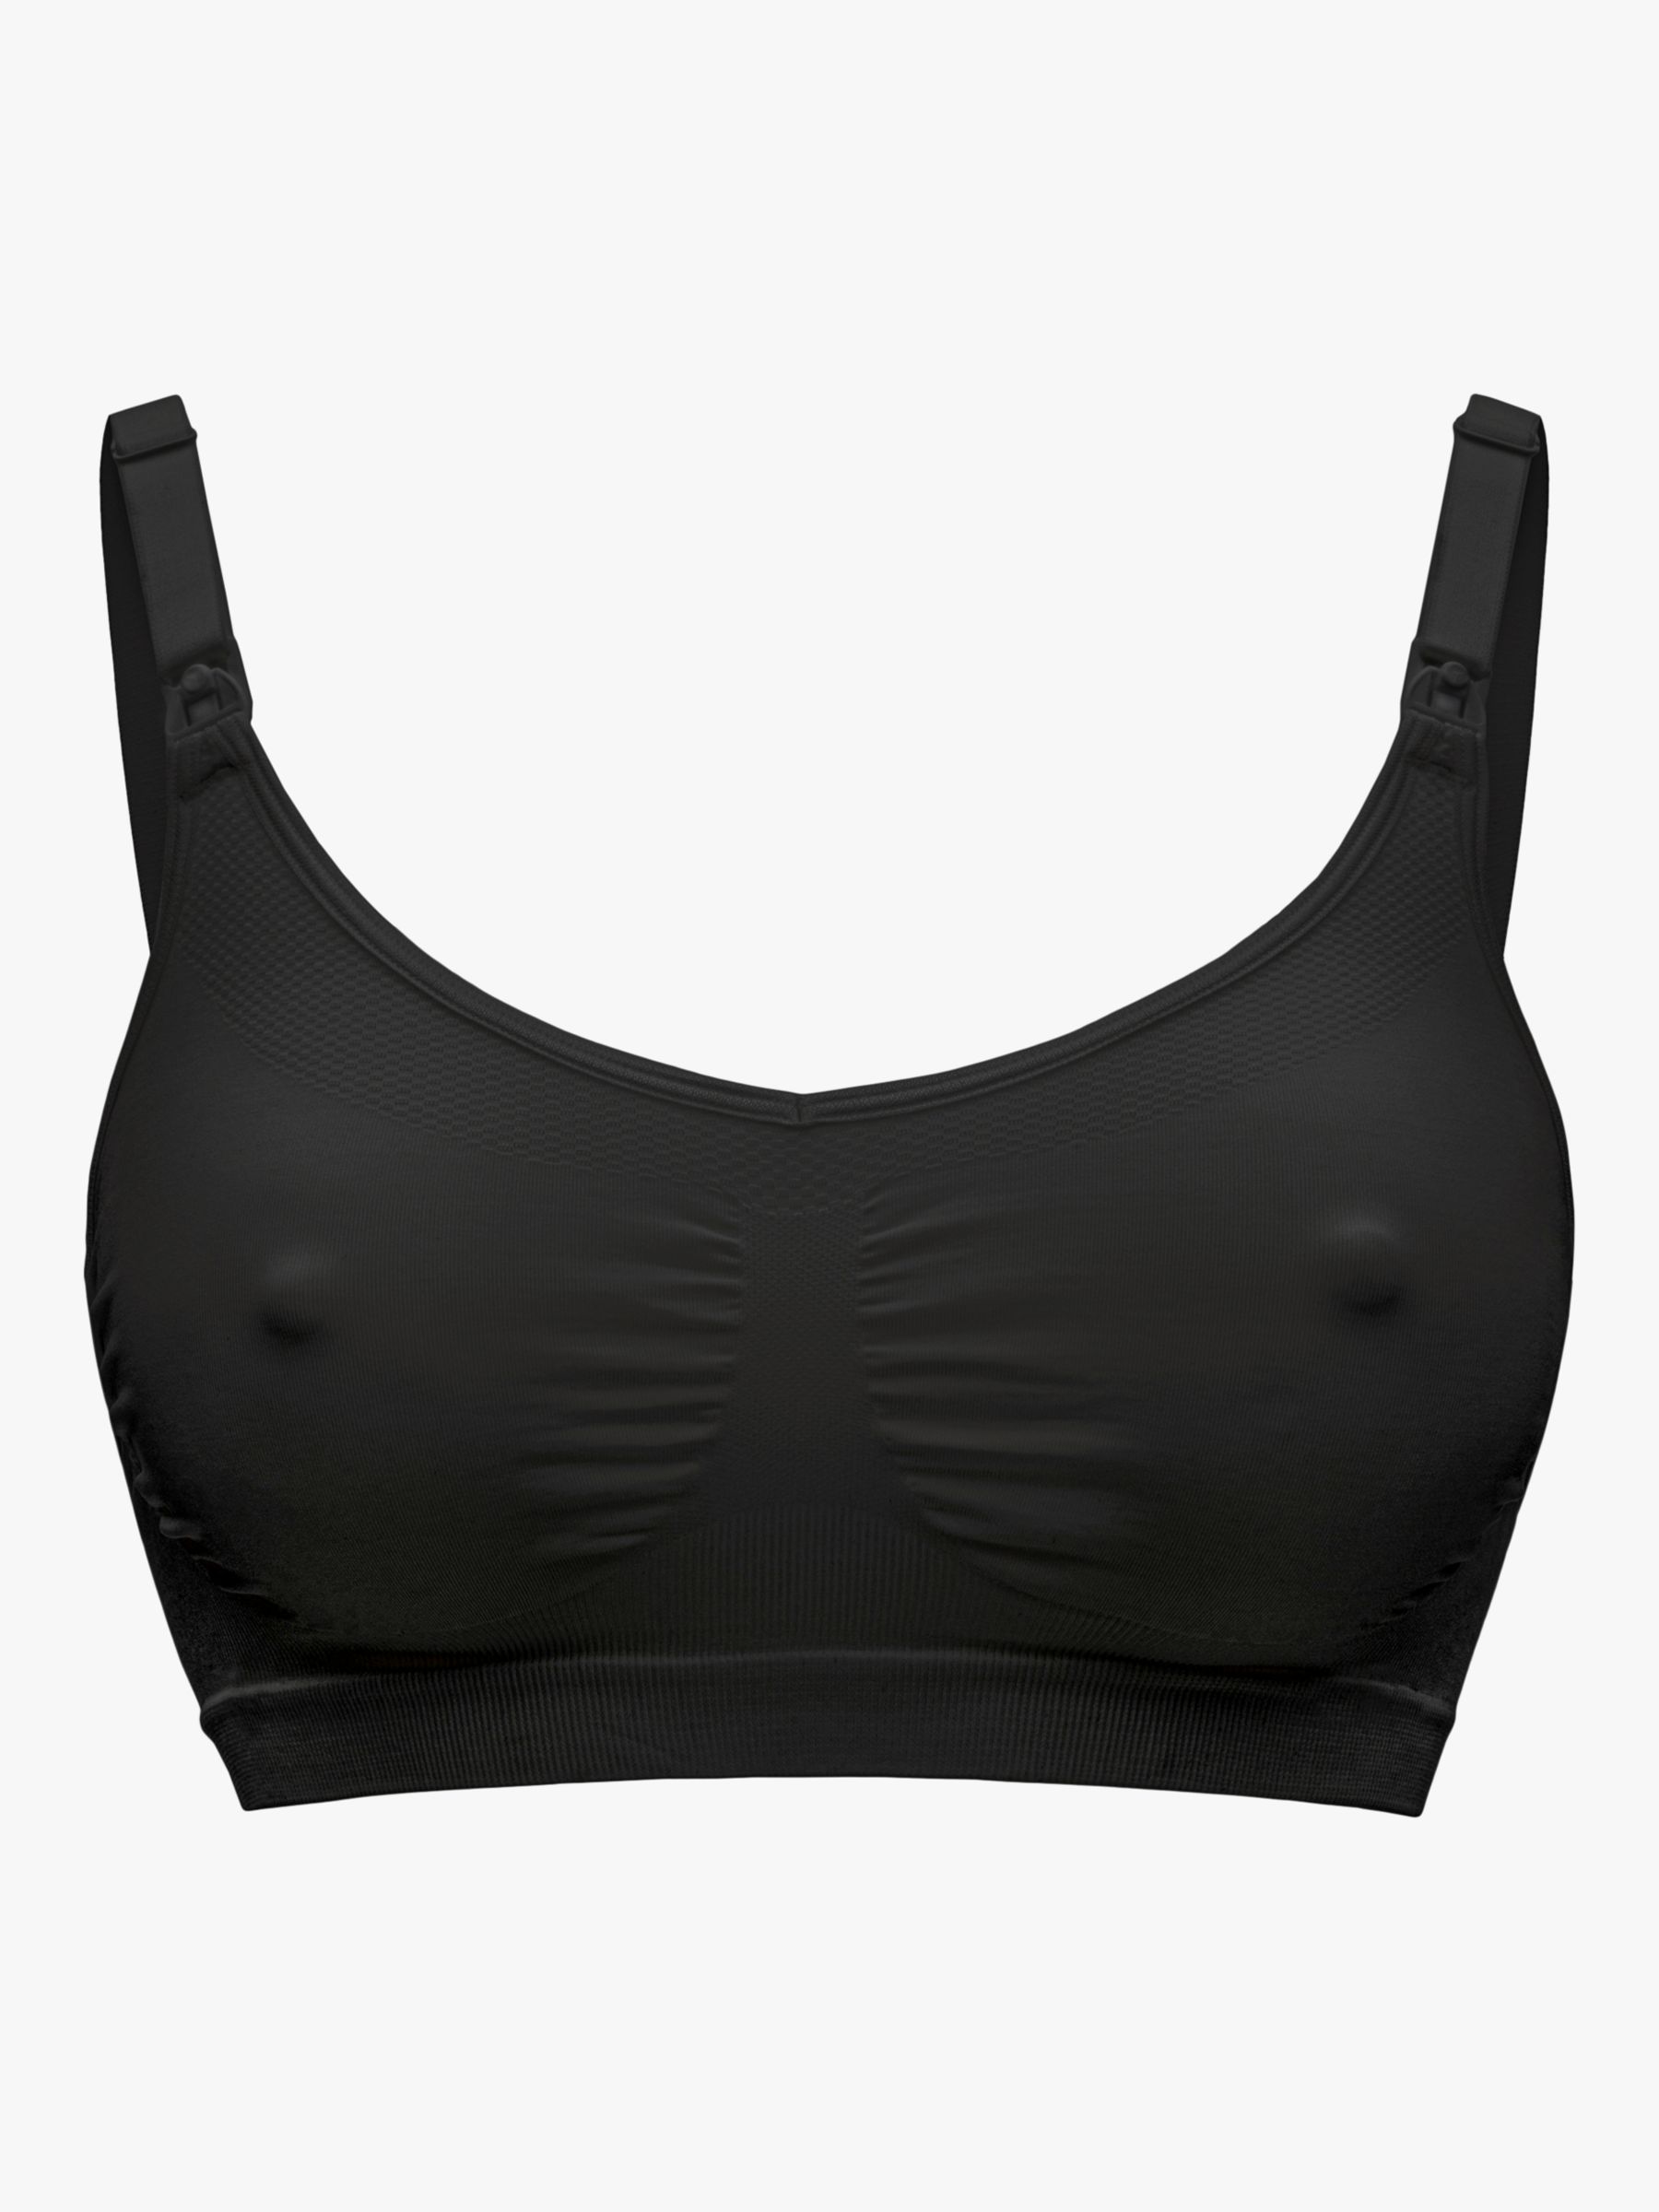 Maternity Bra For Large Bust